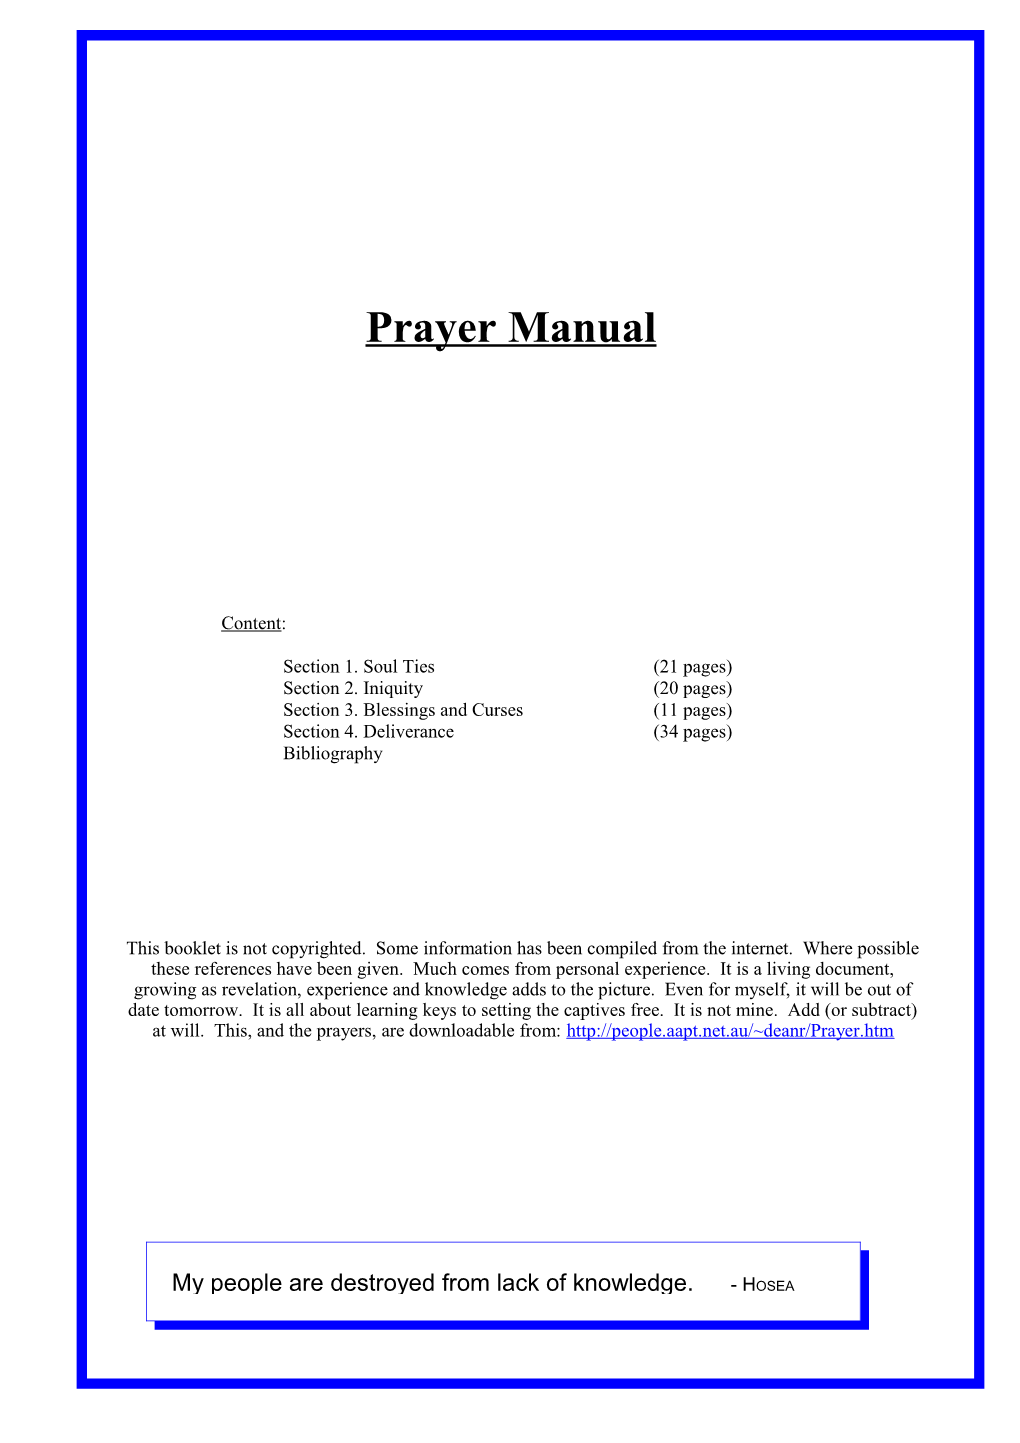 Section 3. Blessings and Curses(11 Pages)